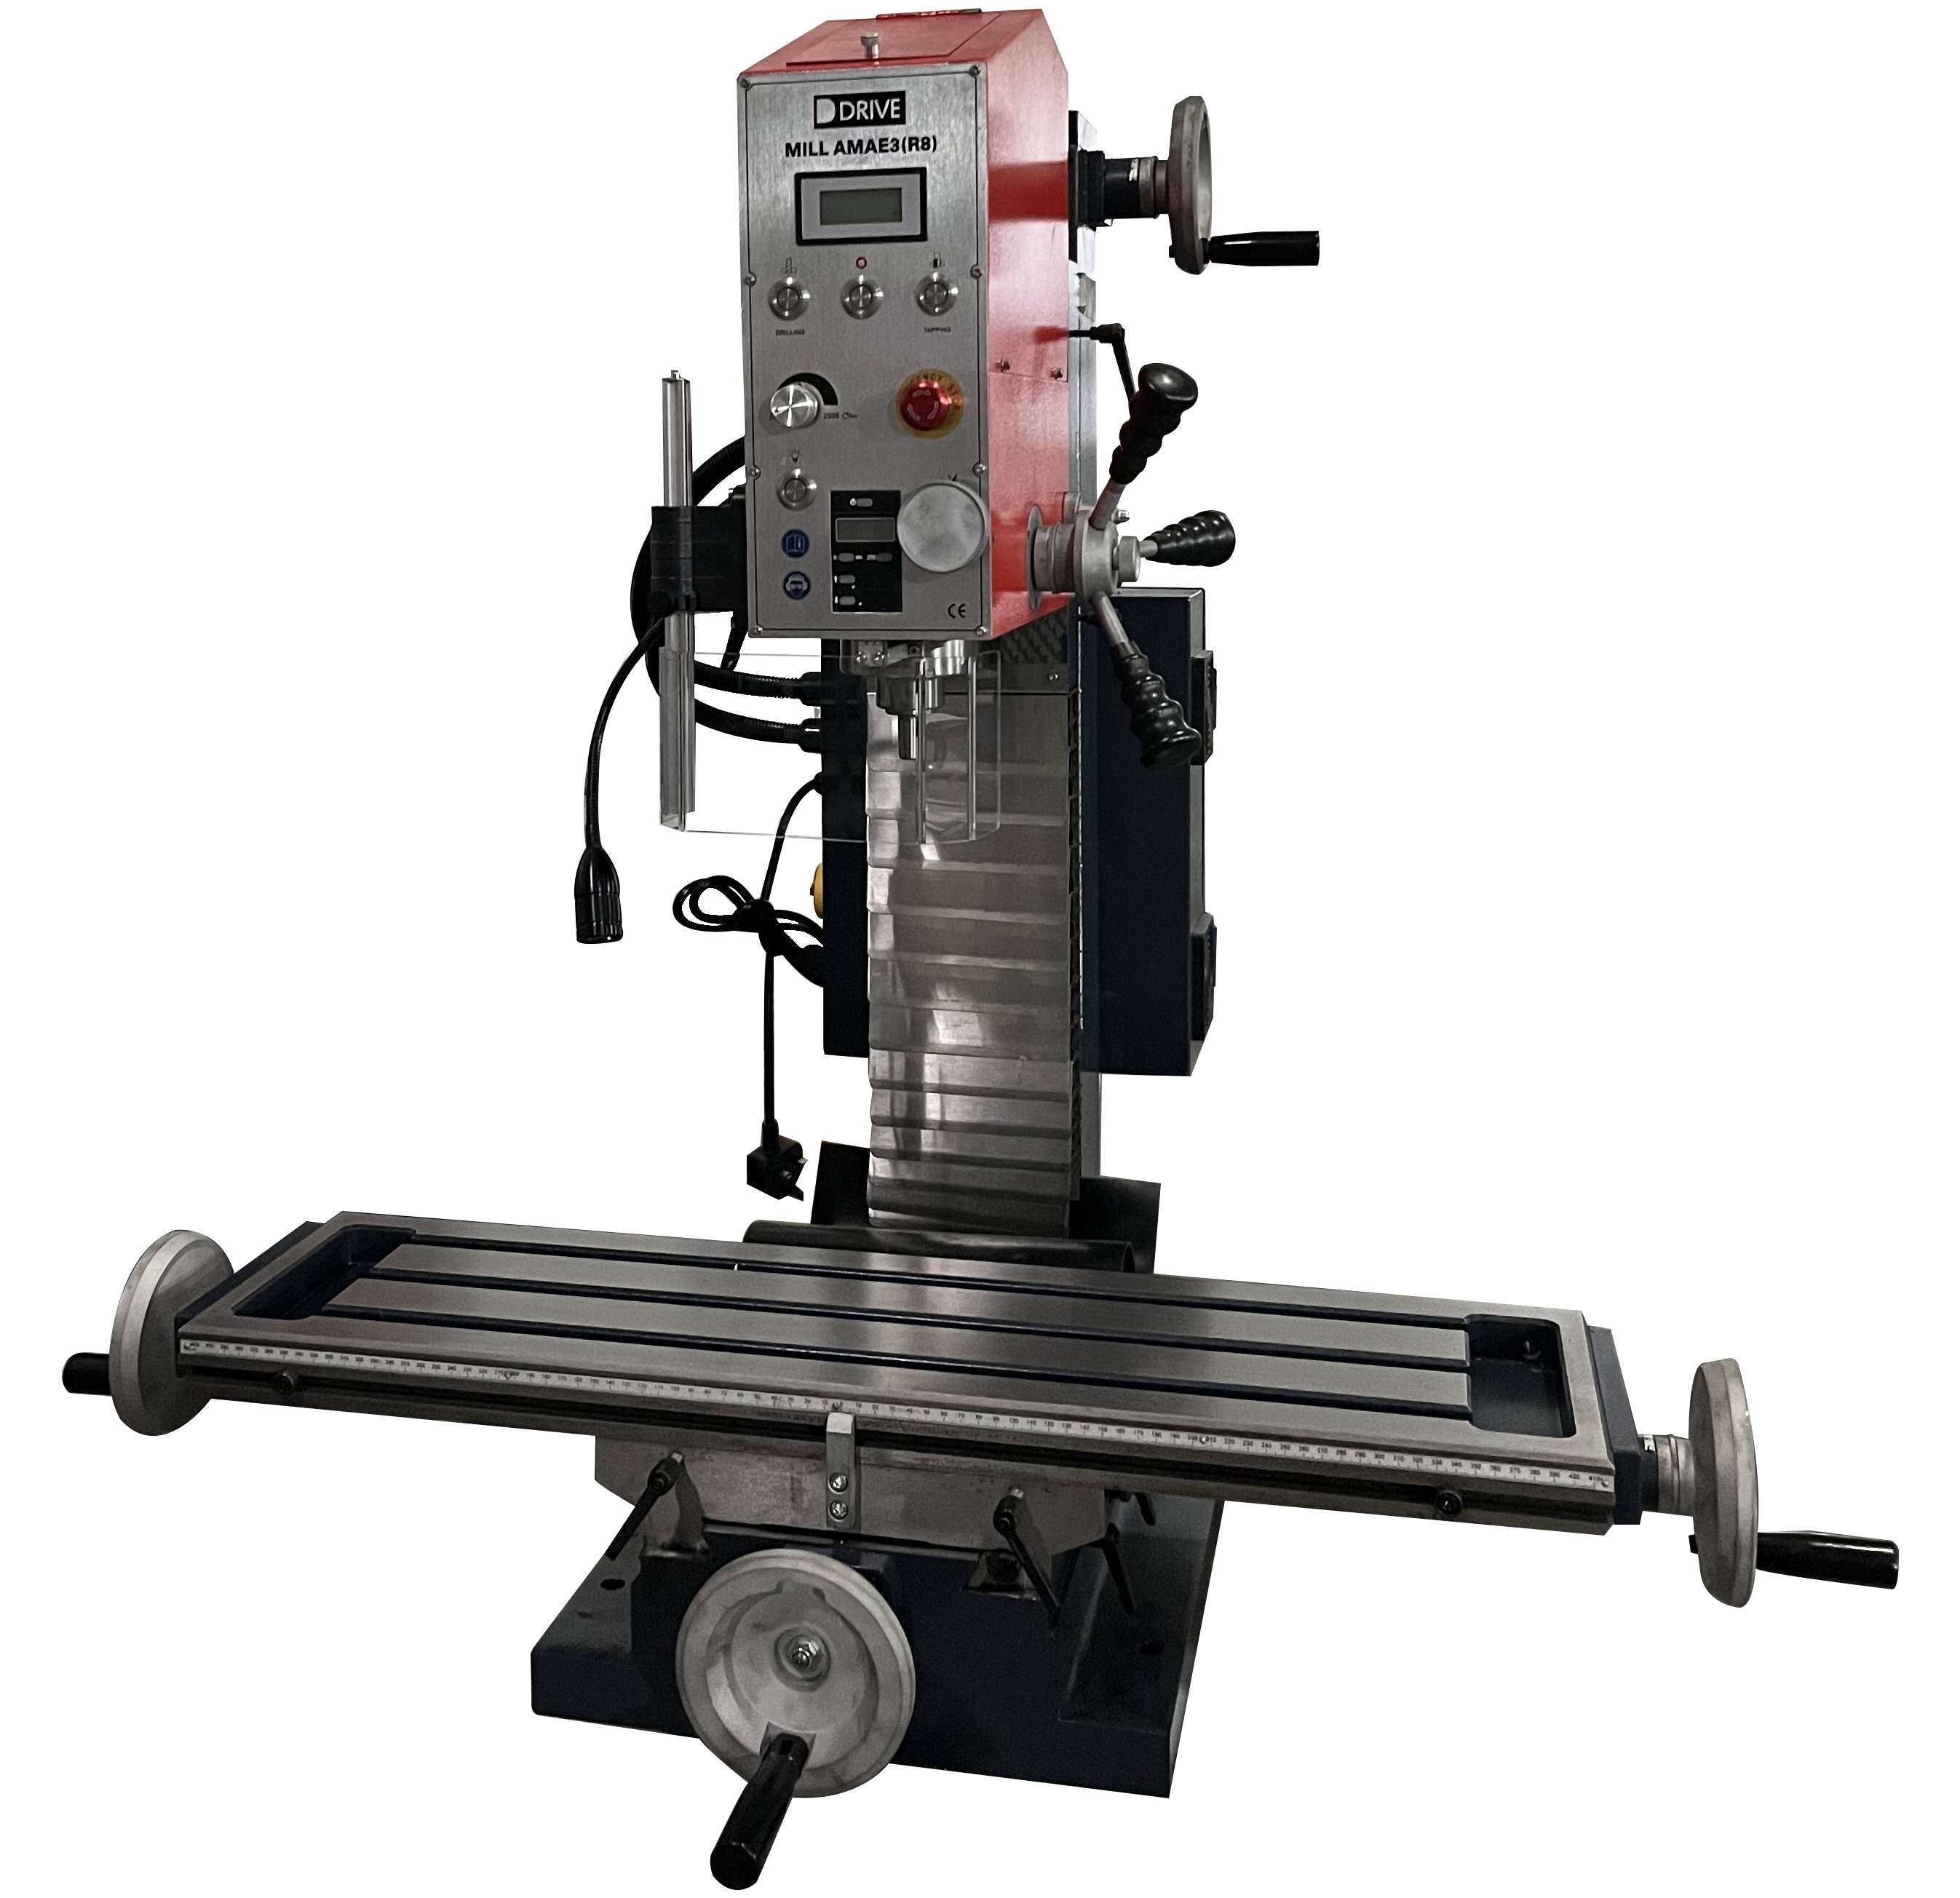 E3 Direct Drive Milling Machine with Brushless Motor 